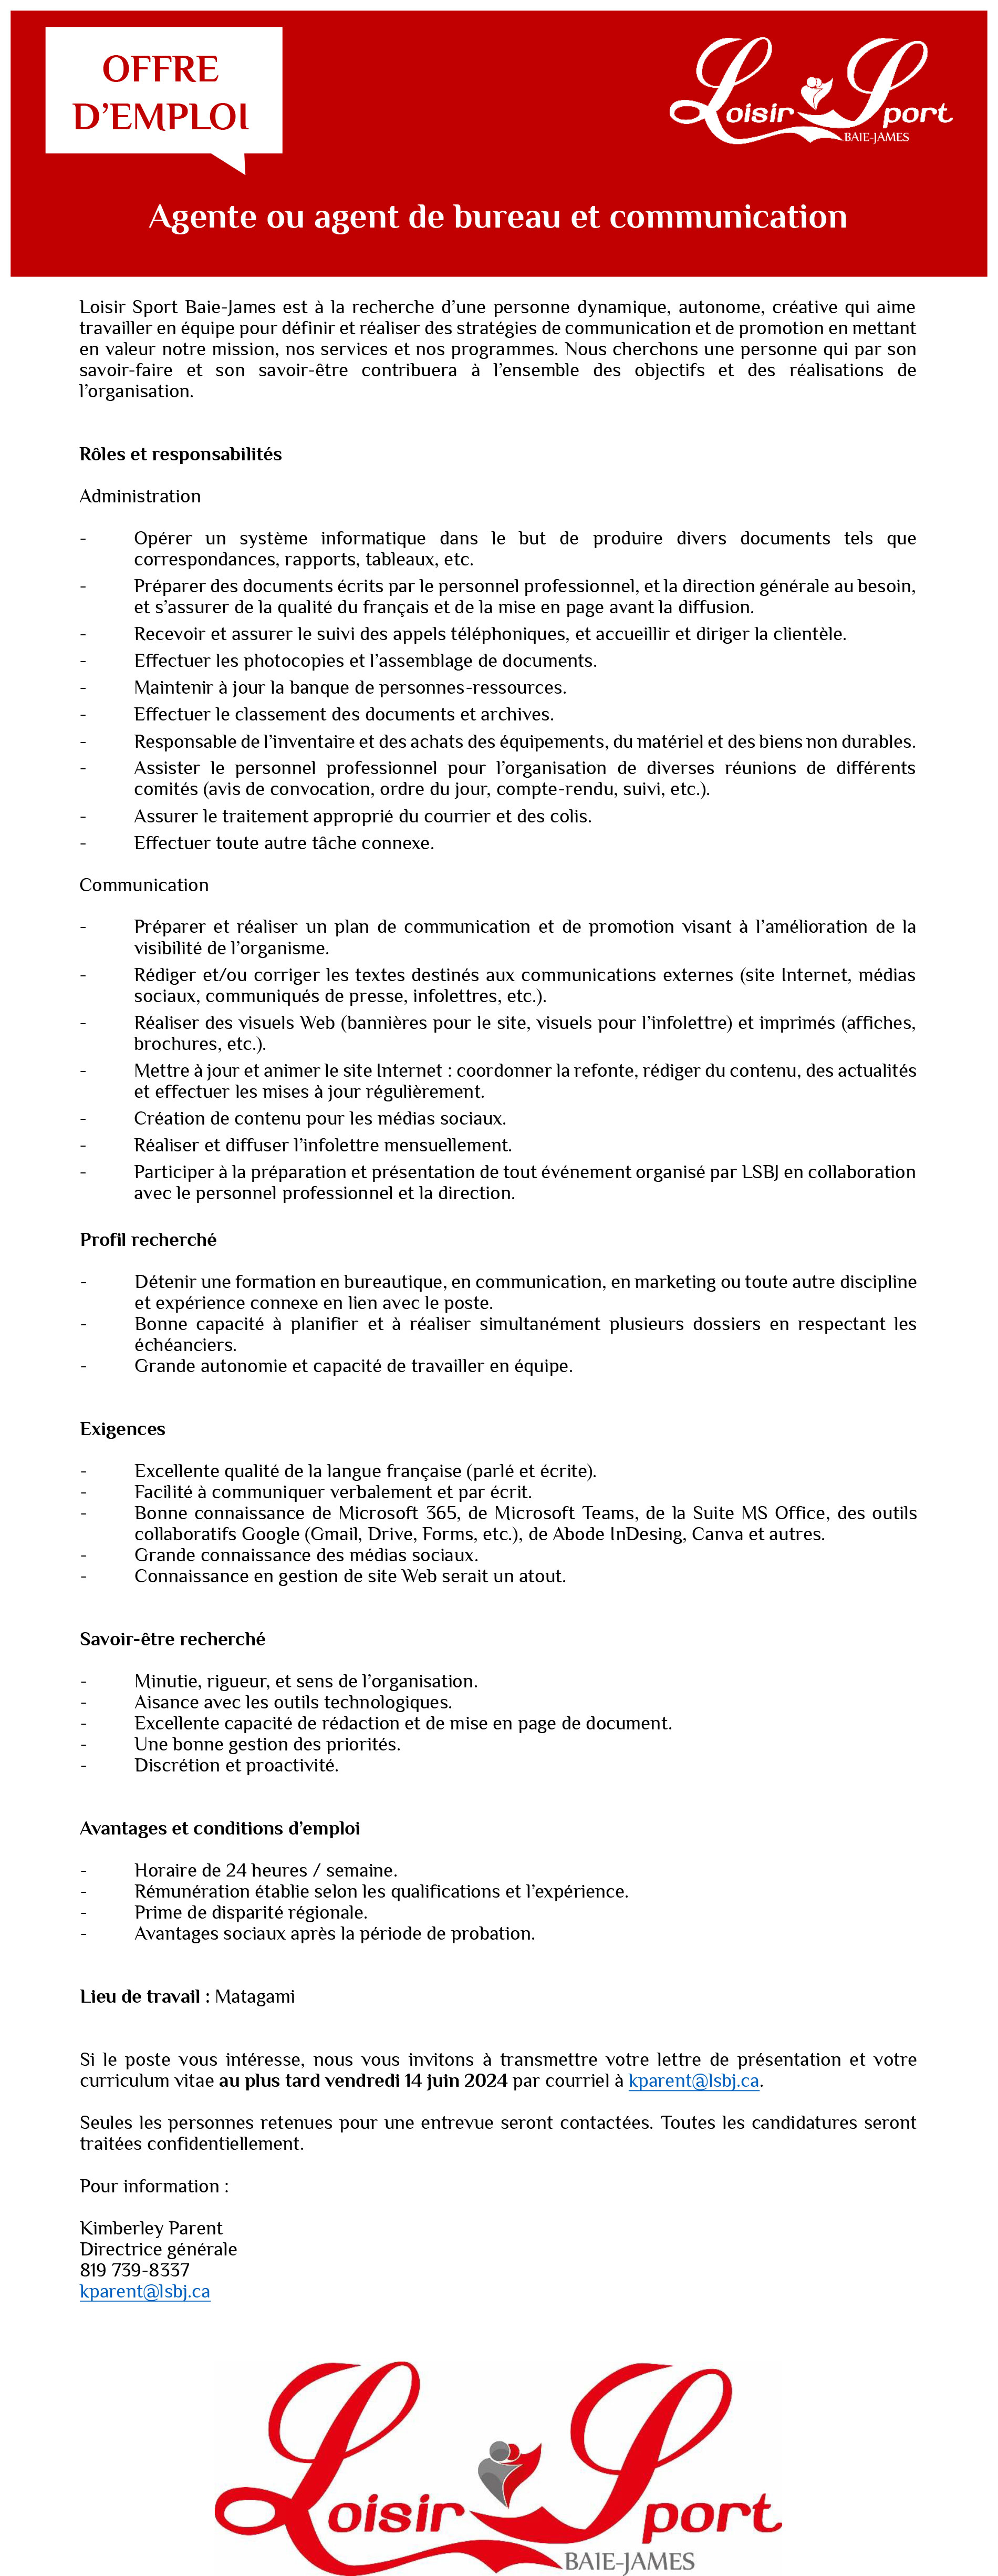 offre emploi direction general